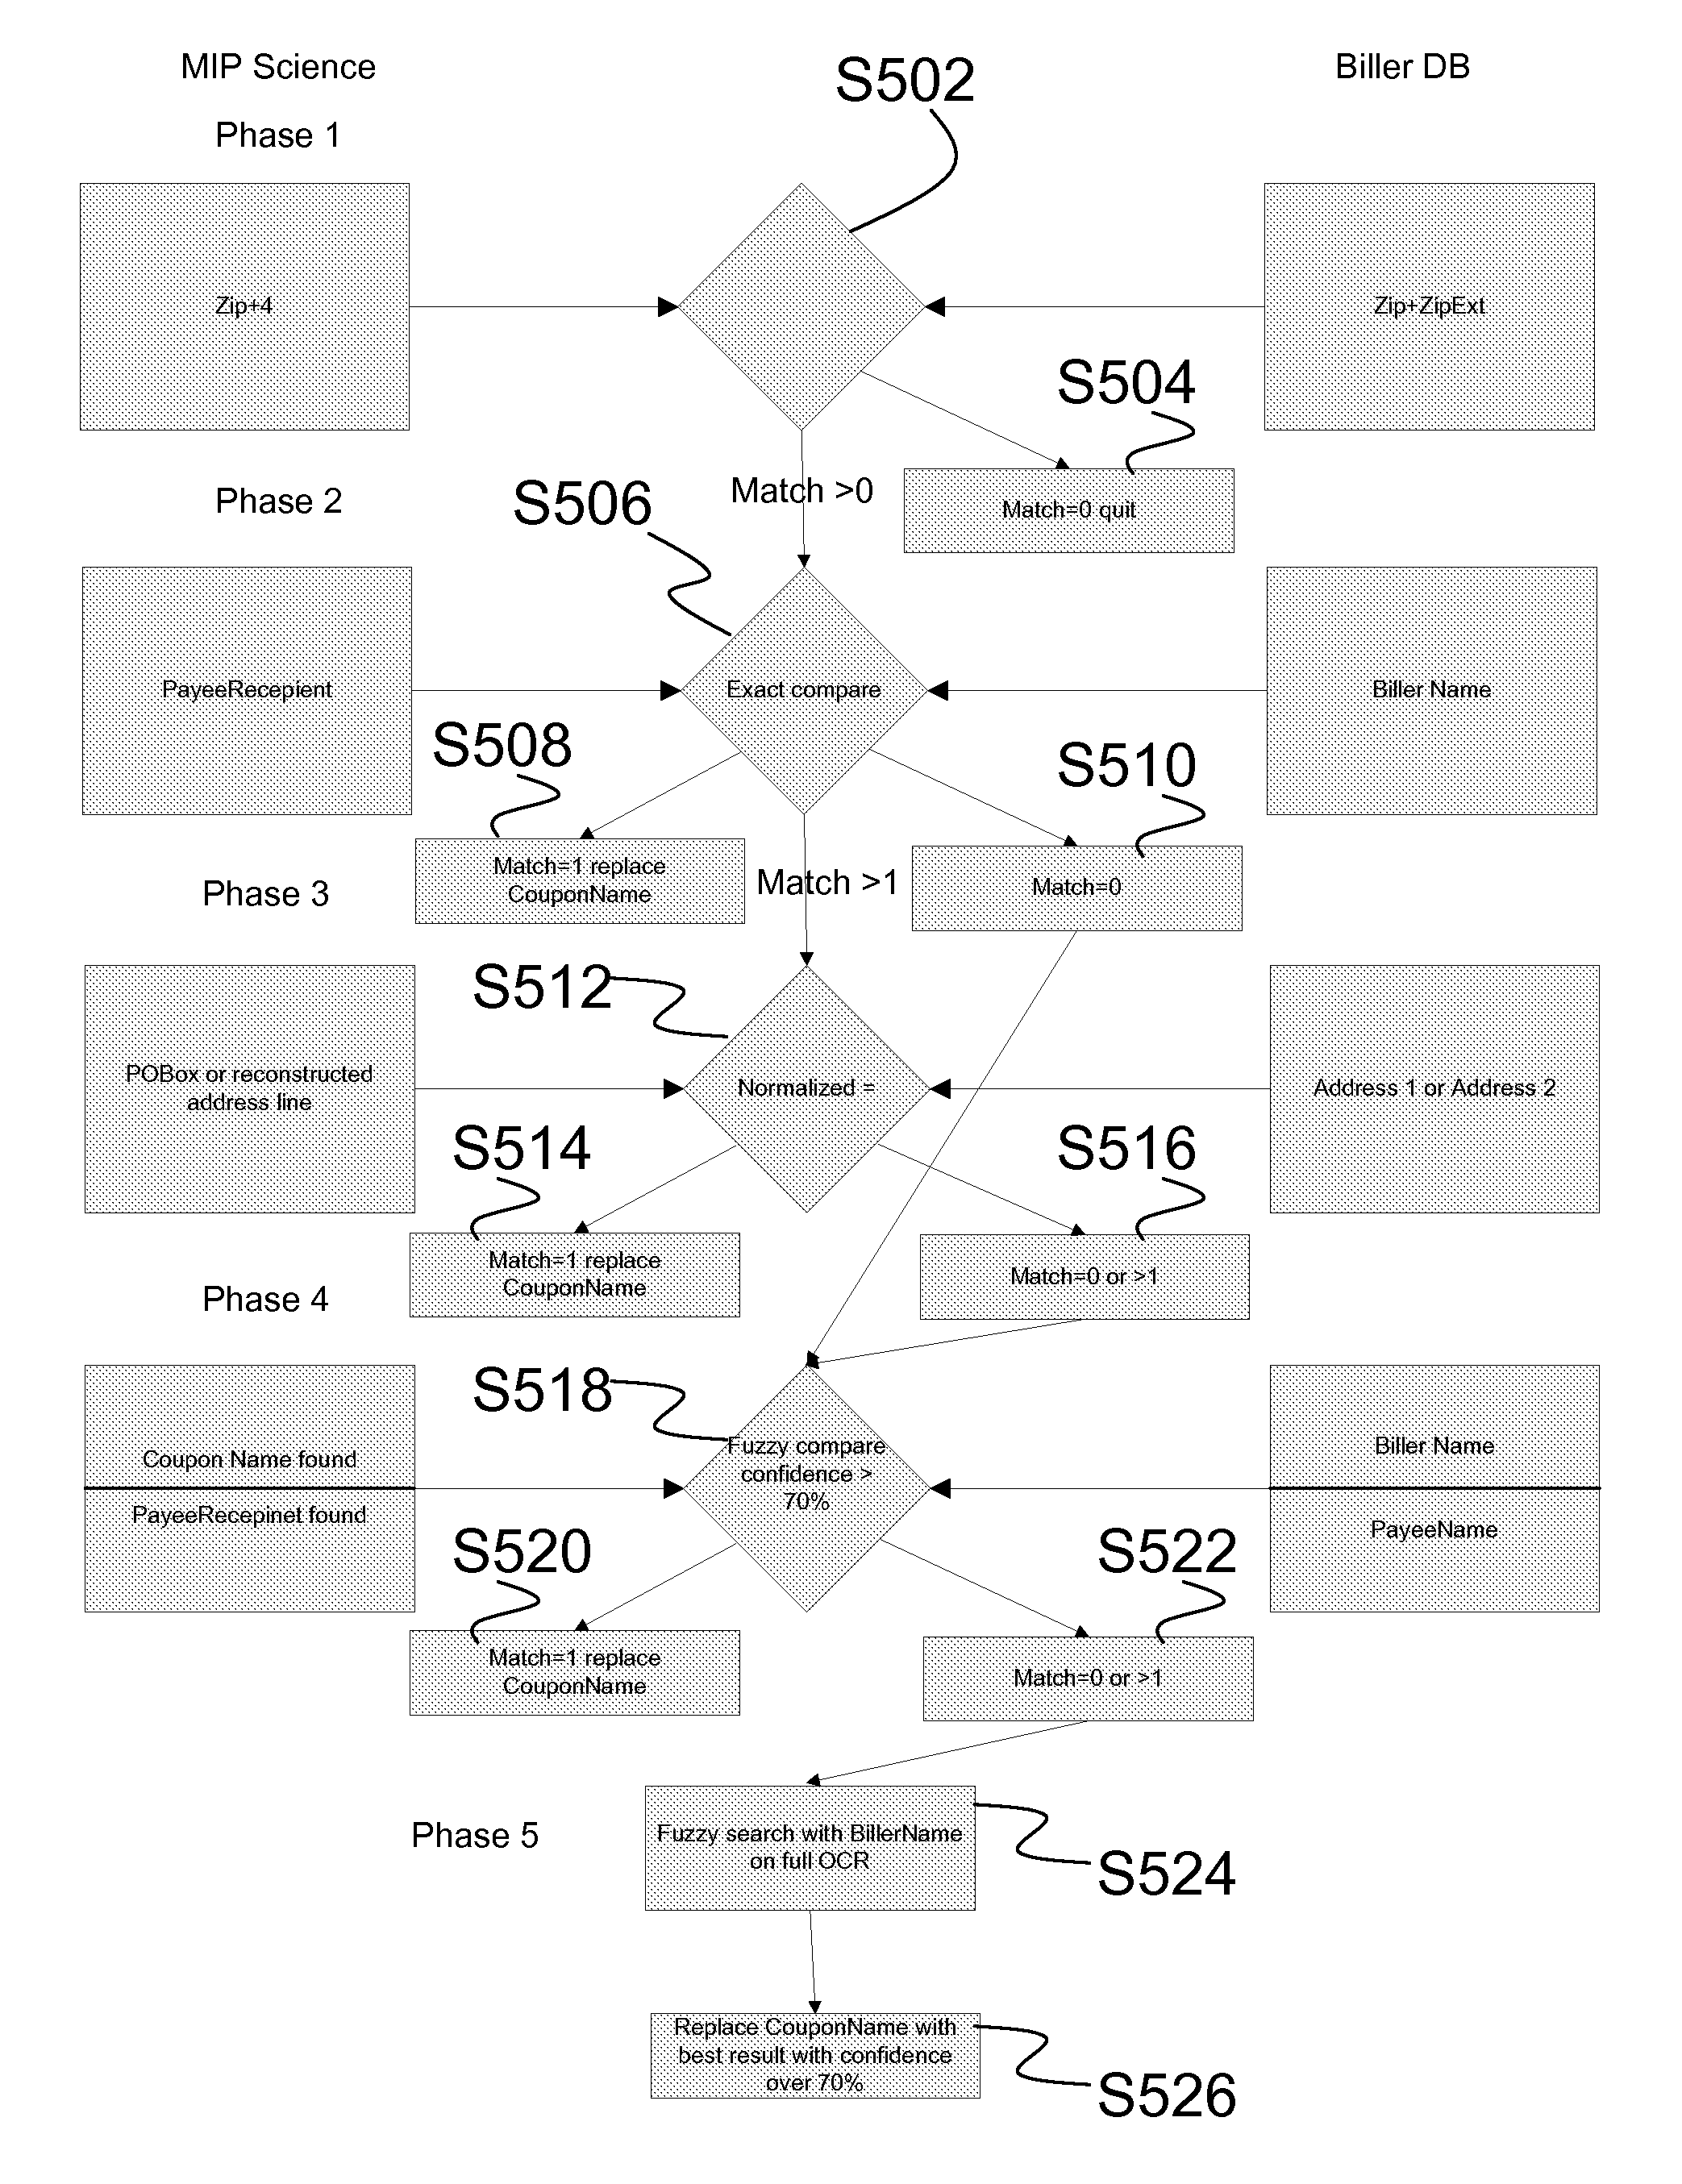 Systems for Mobile Image Capture and Remittance Processing of Documents on a Mobile Device